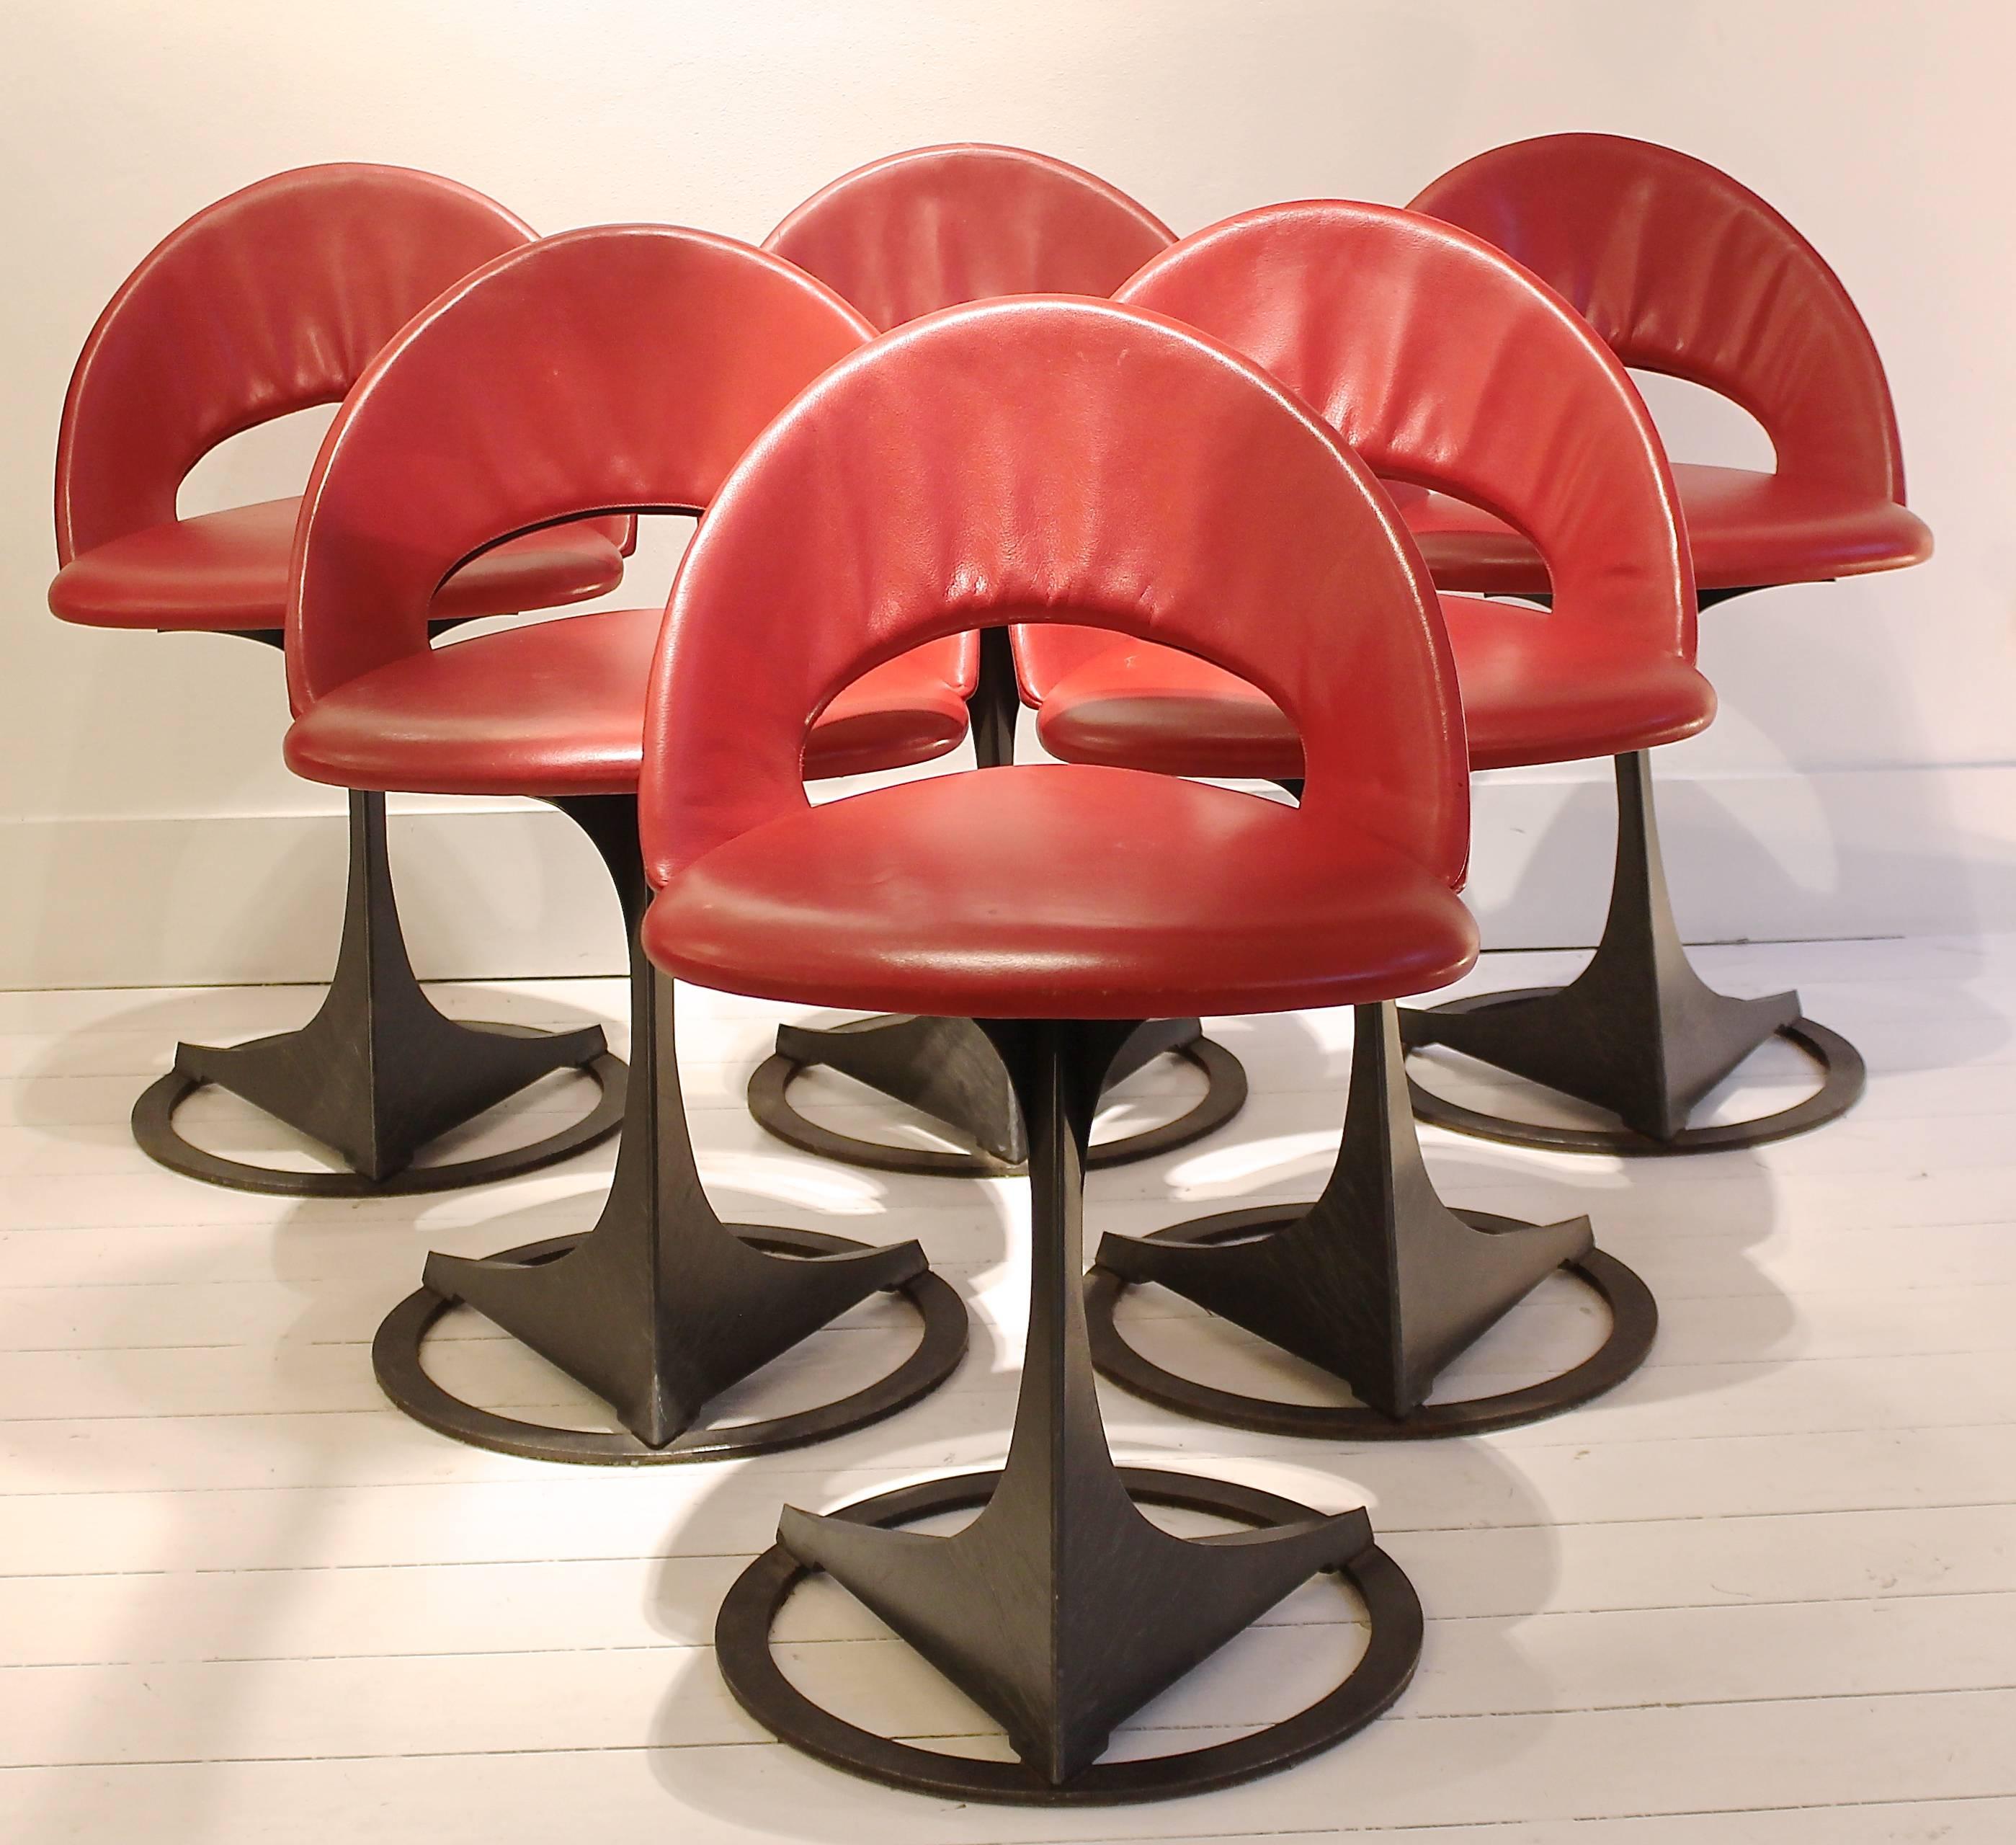 A set of six pedestal chairs in red leather designed by architect Santiago Calatrava and manufactured by De Sede for the infamous cabaret scene Tabourettli Theatre in Basel, Switzerland, in 1986.
These chairs are made of enameled steel and covered